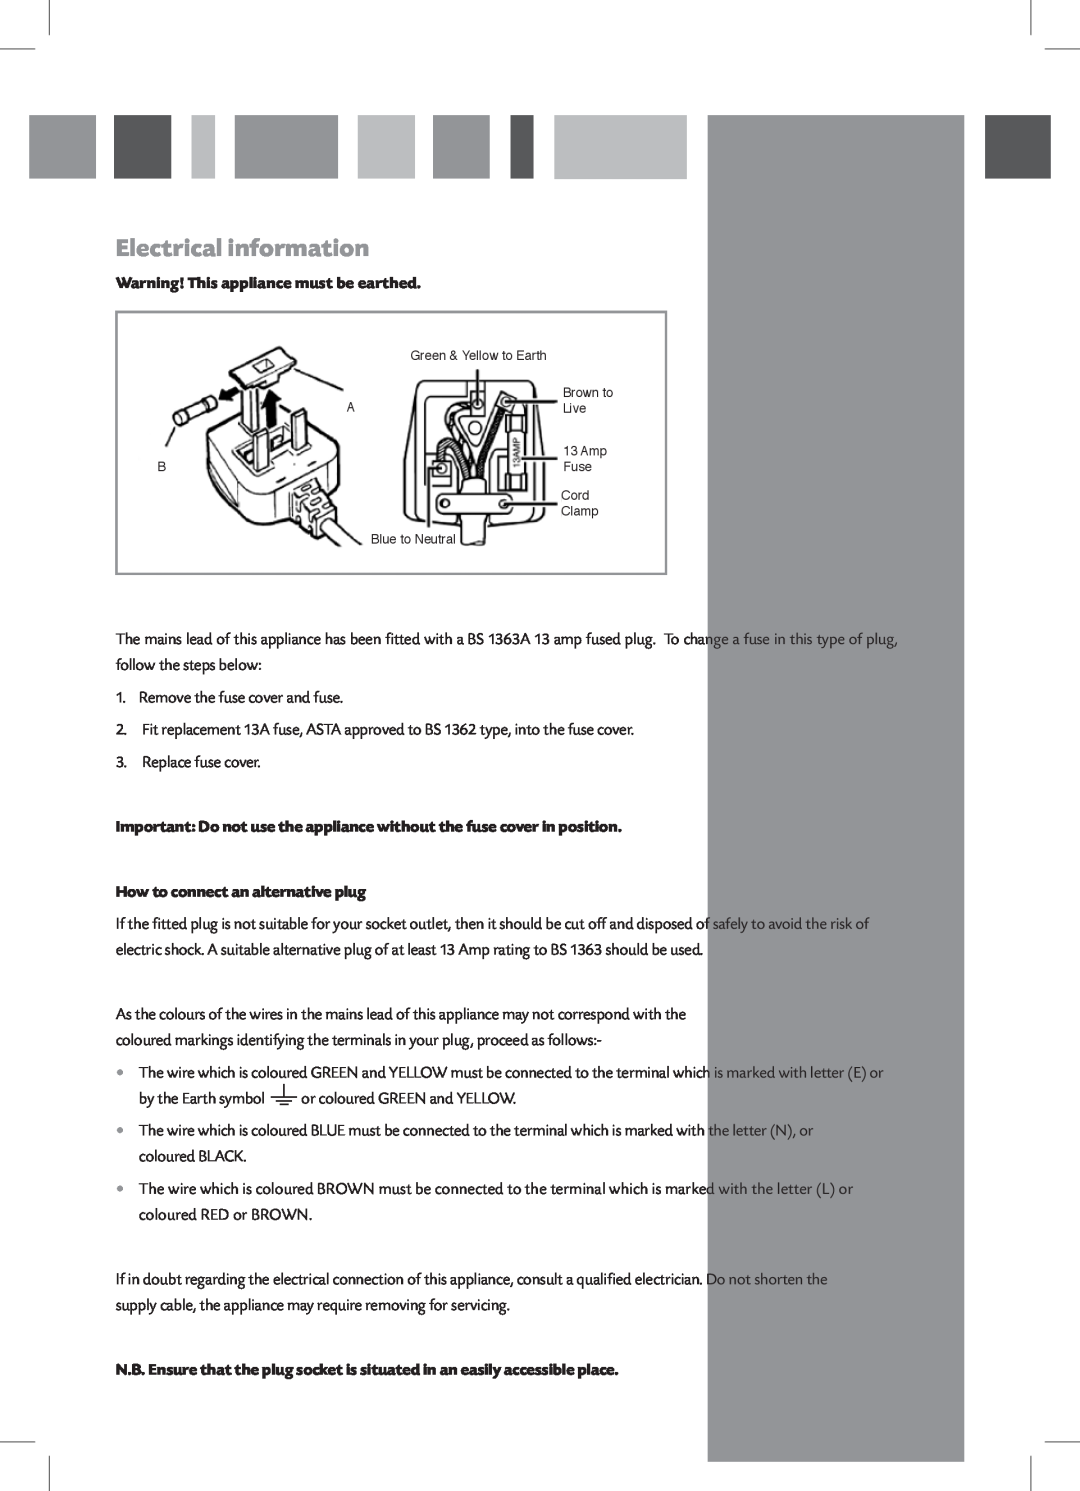 CDA FWV460 manual Electrical information, Warning! This appliance must be earthed, How to connect an alternative plug 